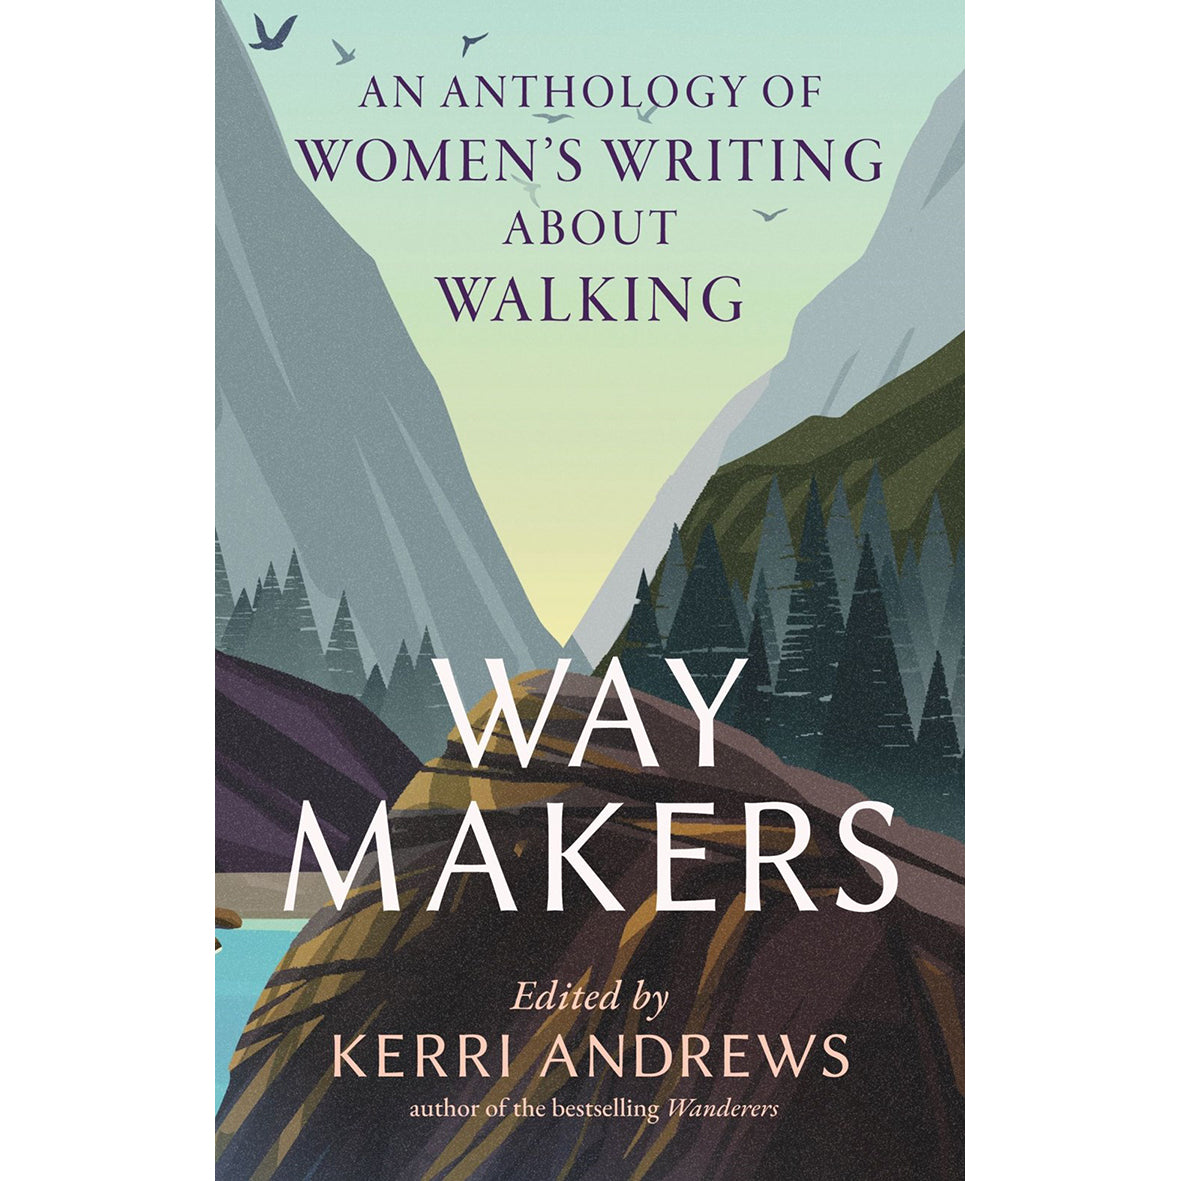 Way Makers: An Anthology of Women’s Writing about Walking